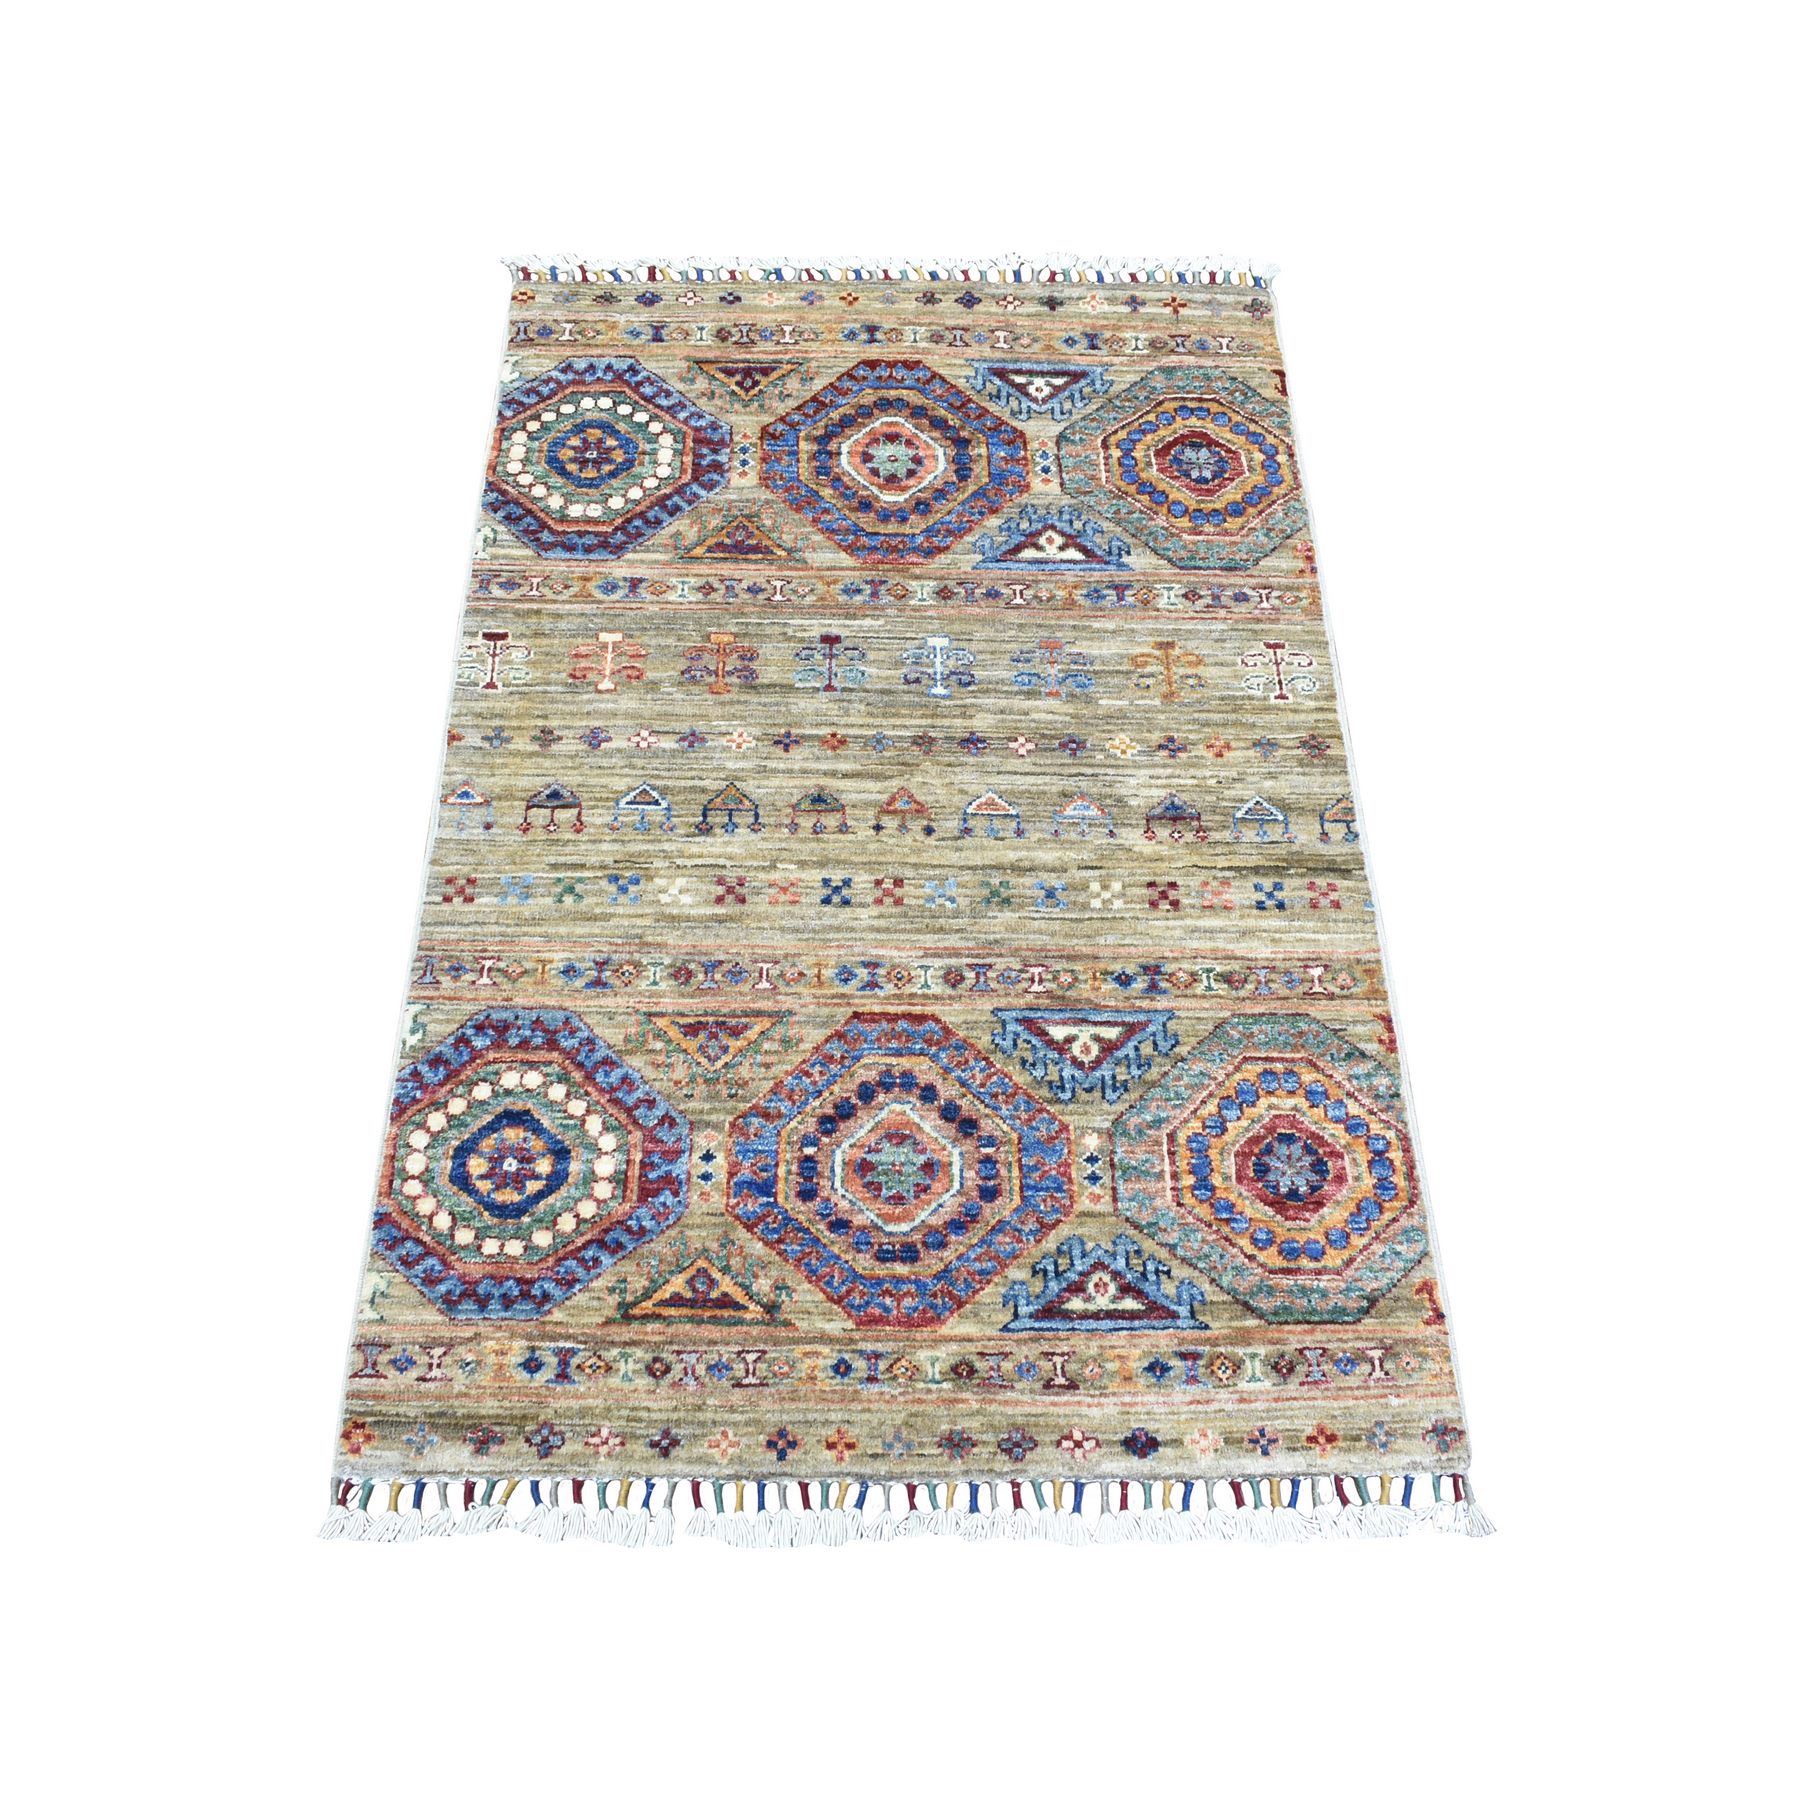 2'8"x4' Taupe, Soft and Velvety Wool Hand Woven, Afghan Super Kazak with Khorjin Design Natural Dyes Densely Weave, Oriental Rug 